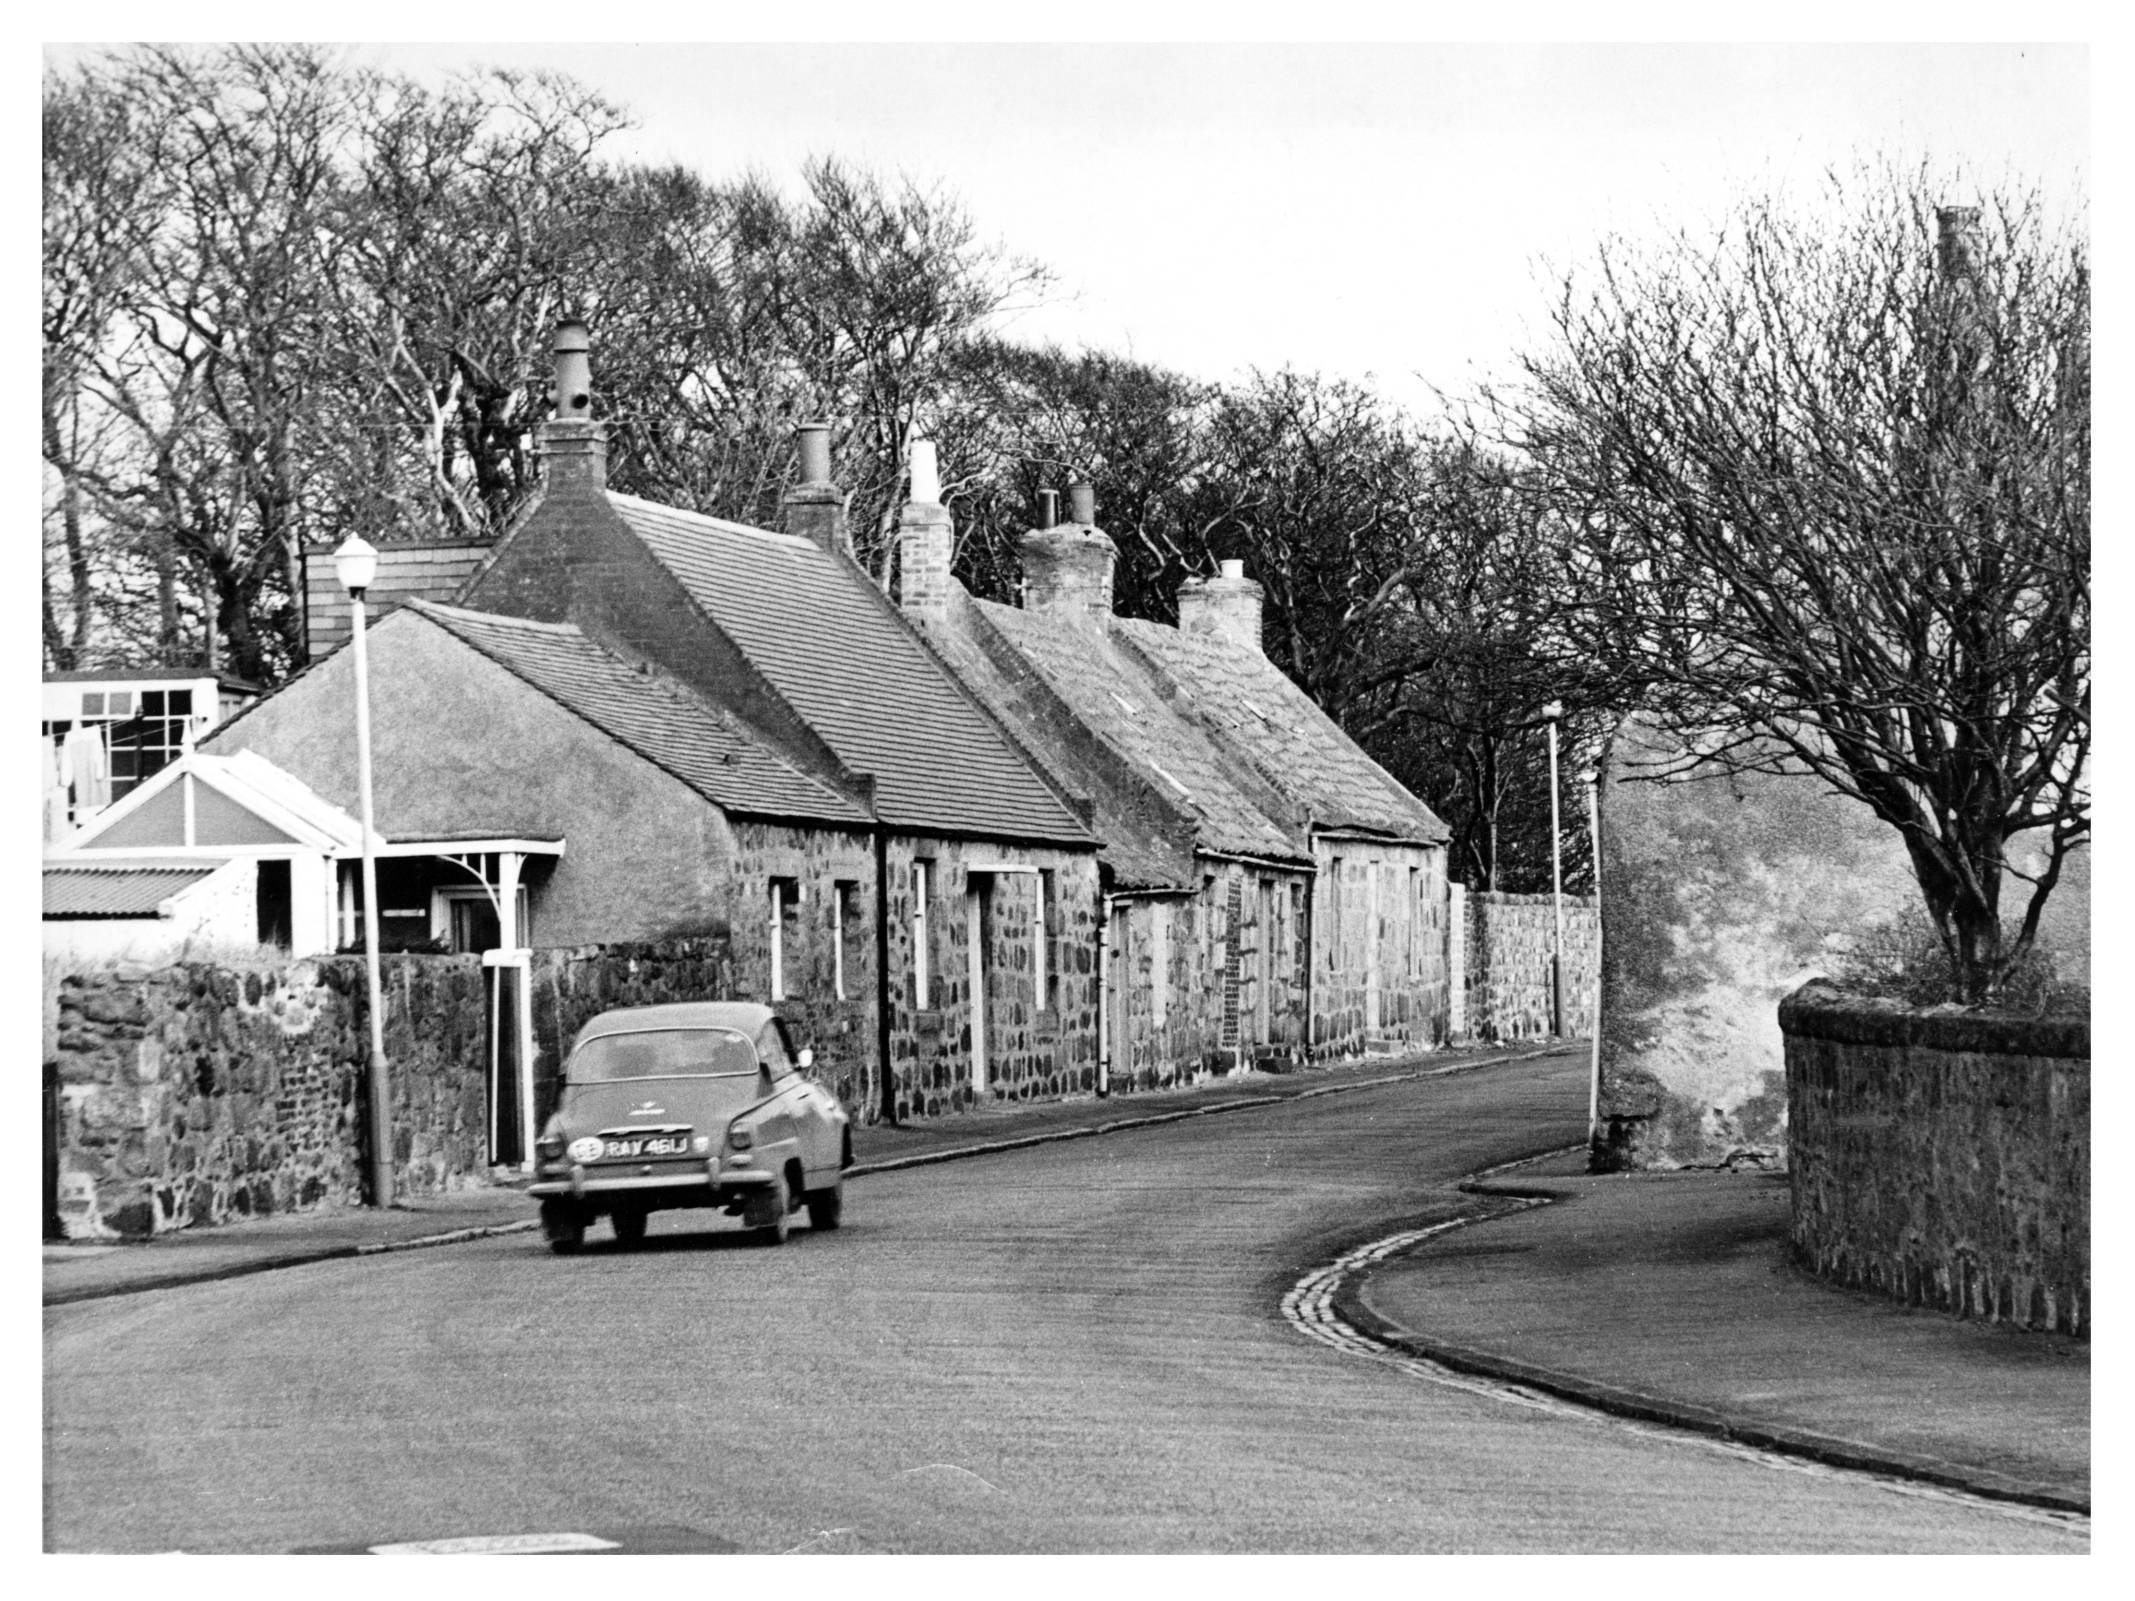 1971: Numbers 115, 117 and 119 Dons Street - rubble-built, pan tiled cottages - were scheduled for preservation.